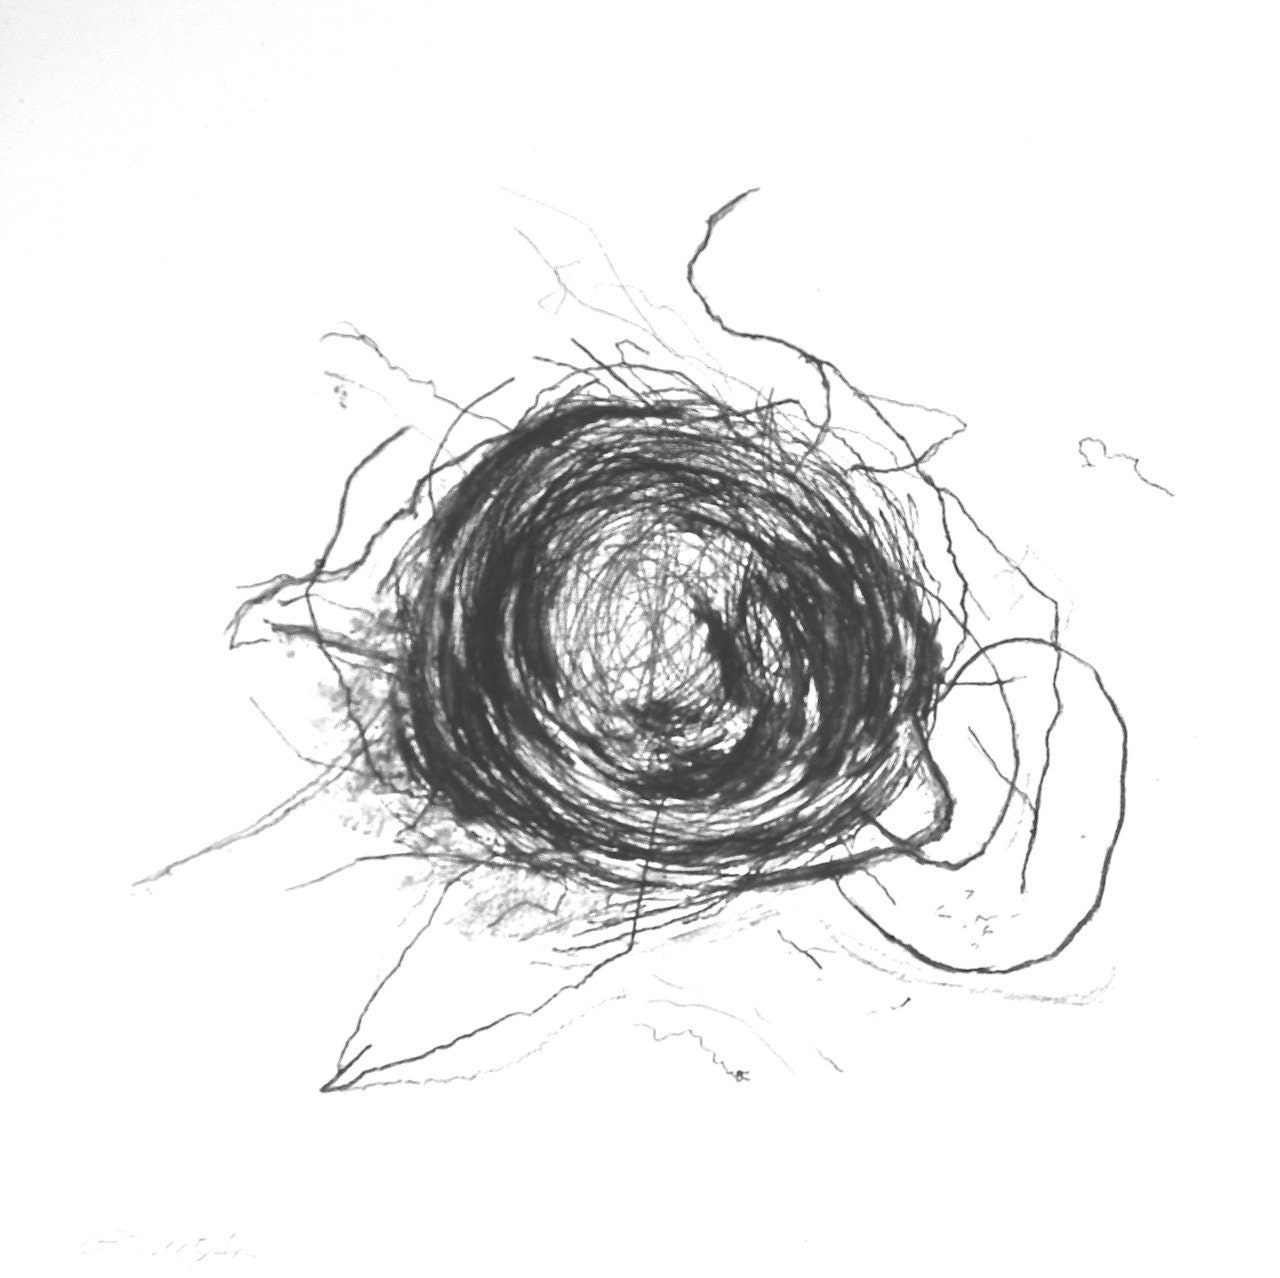 abstract art charcoal drawing (scream)